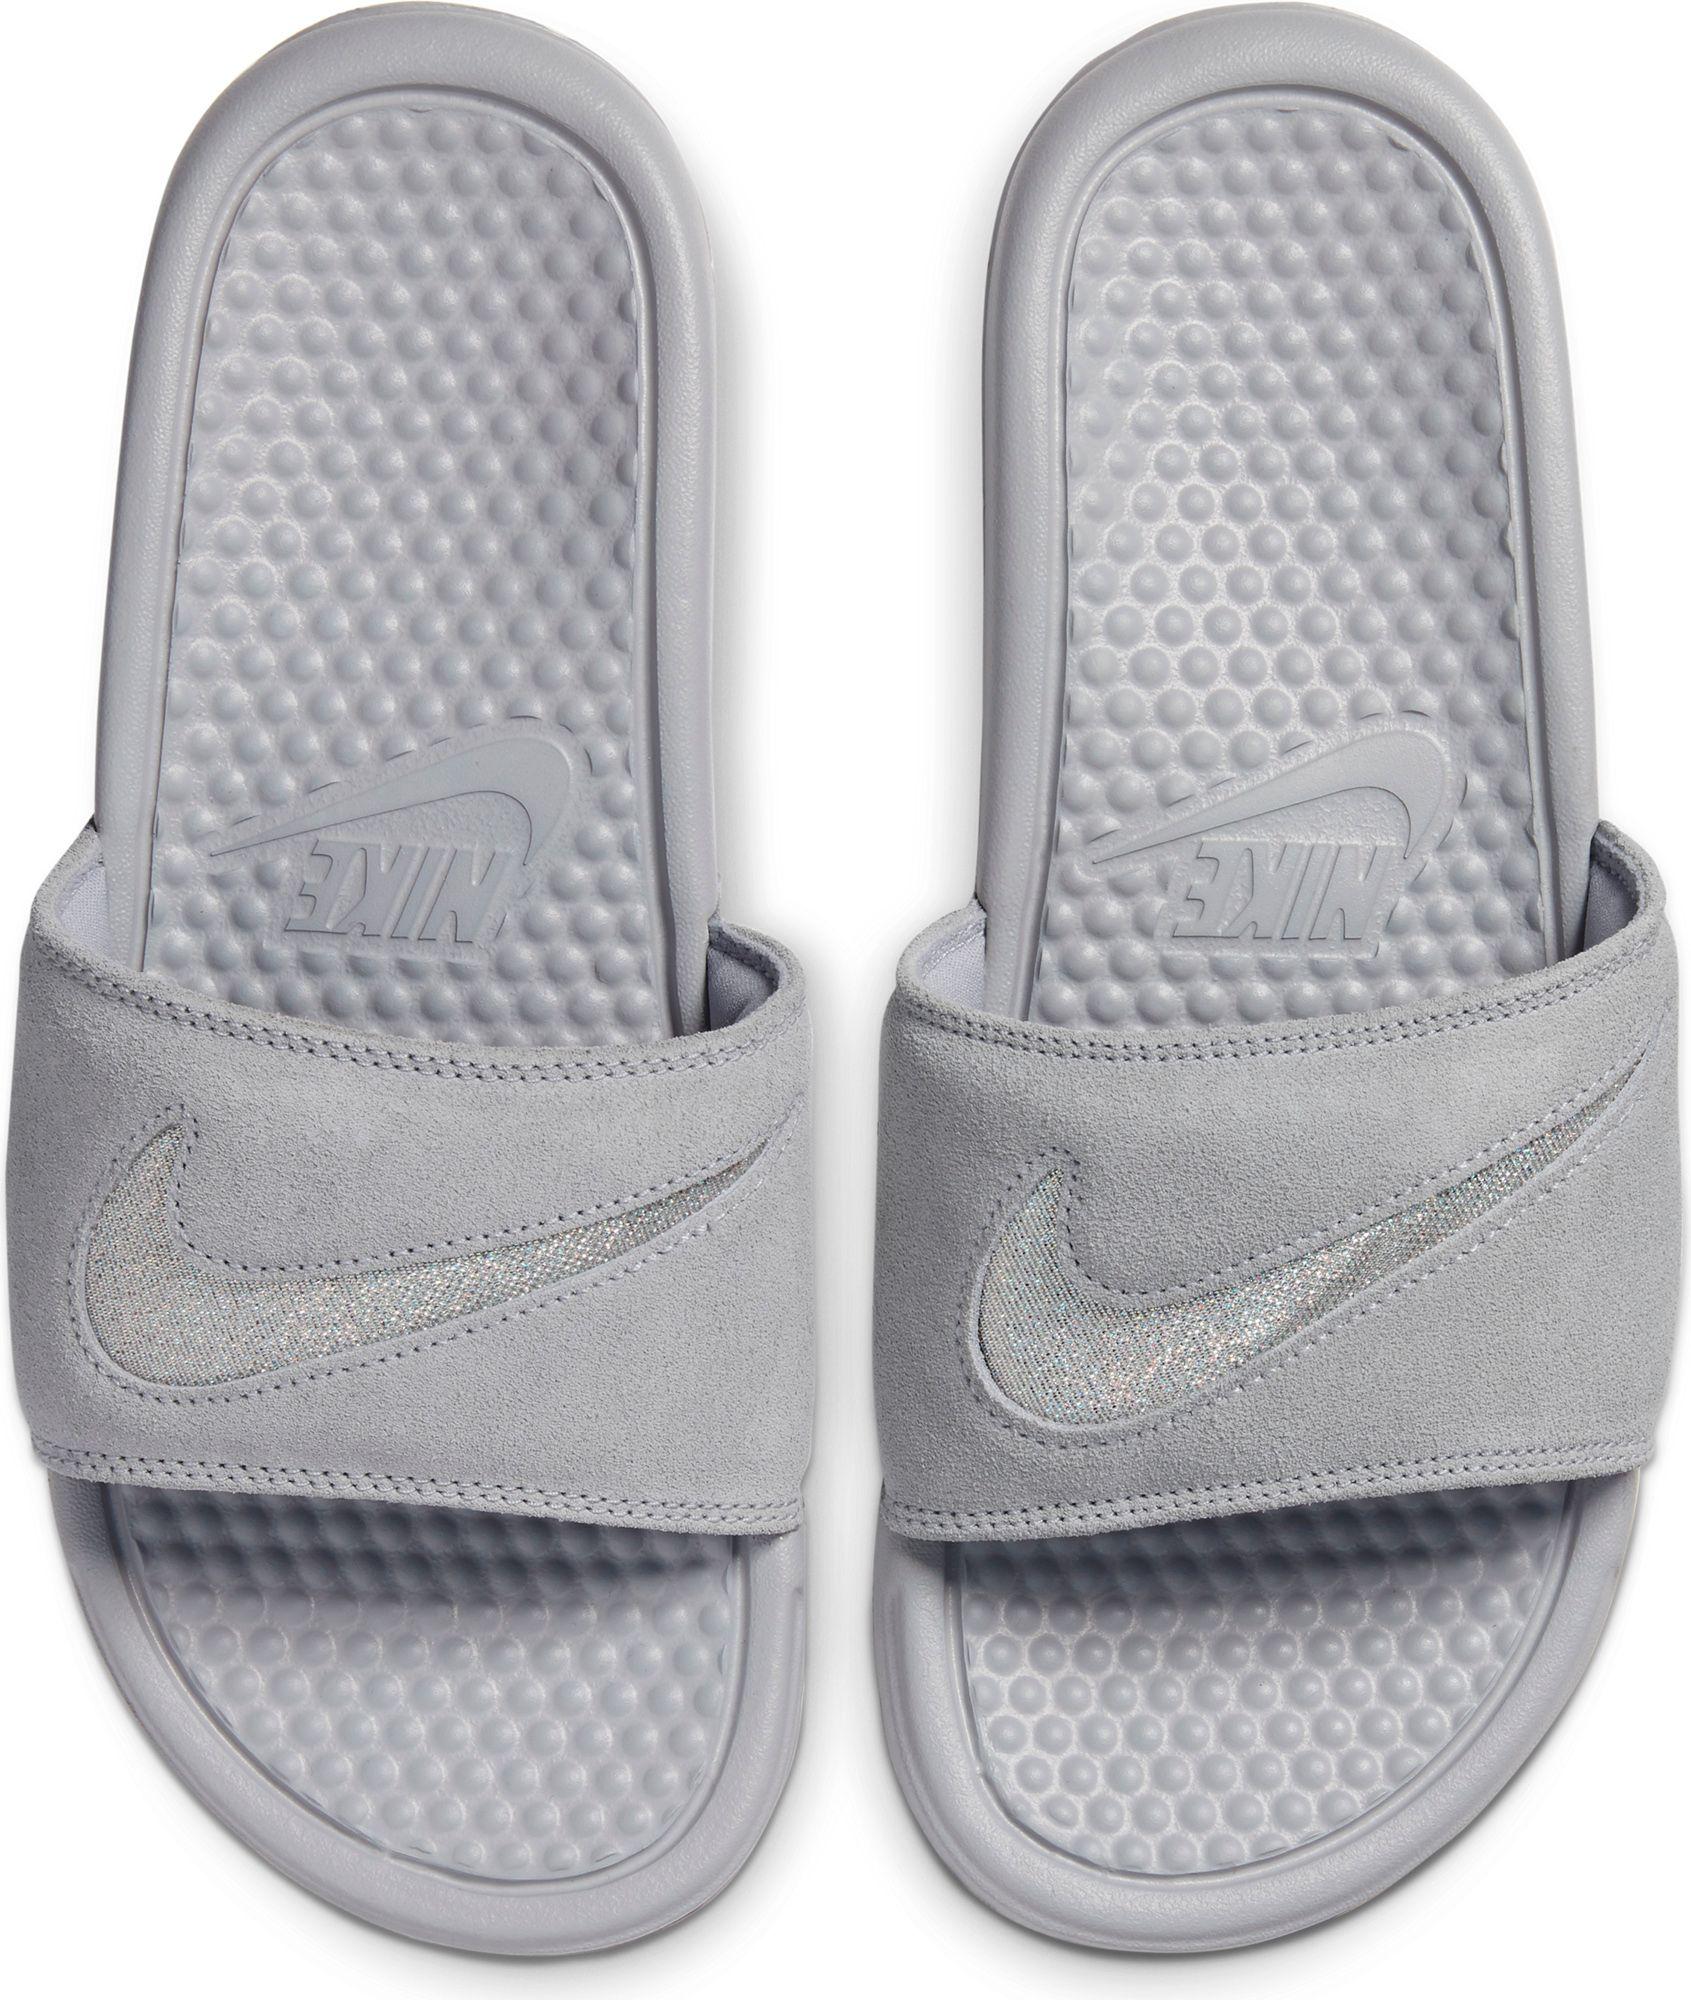 Nike Benassi Just Do It Leather Se Slides in Grey/Metallic Silver (Gray) -  Lyst